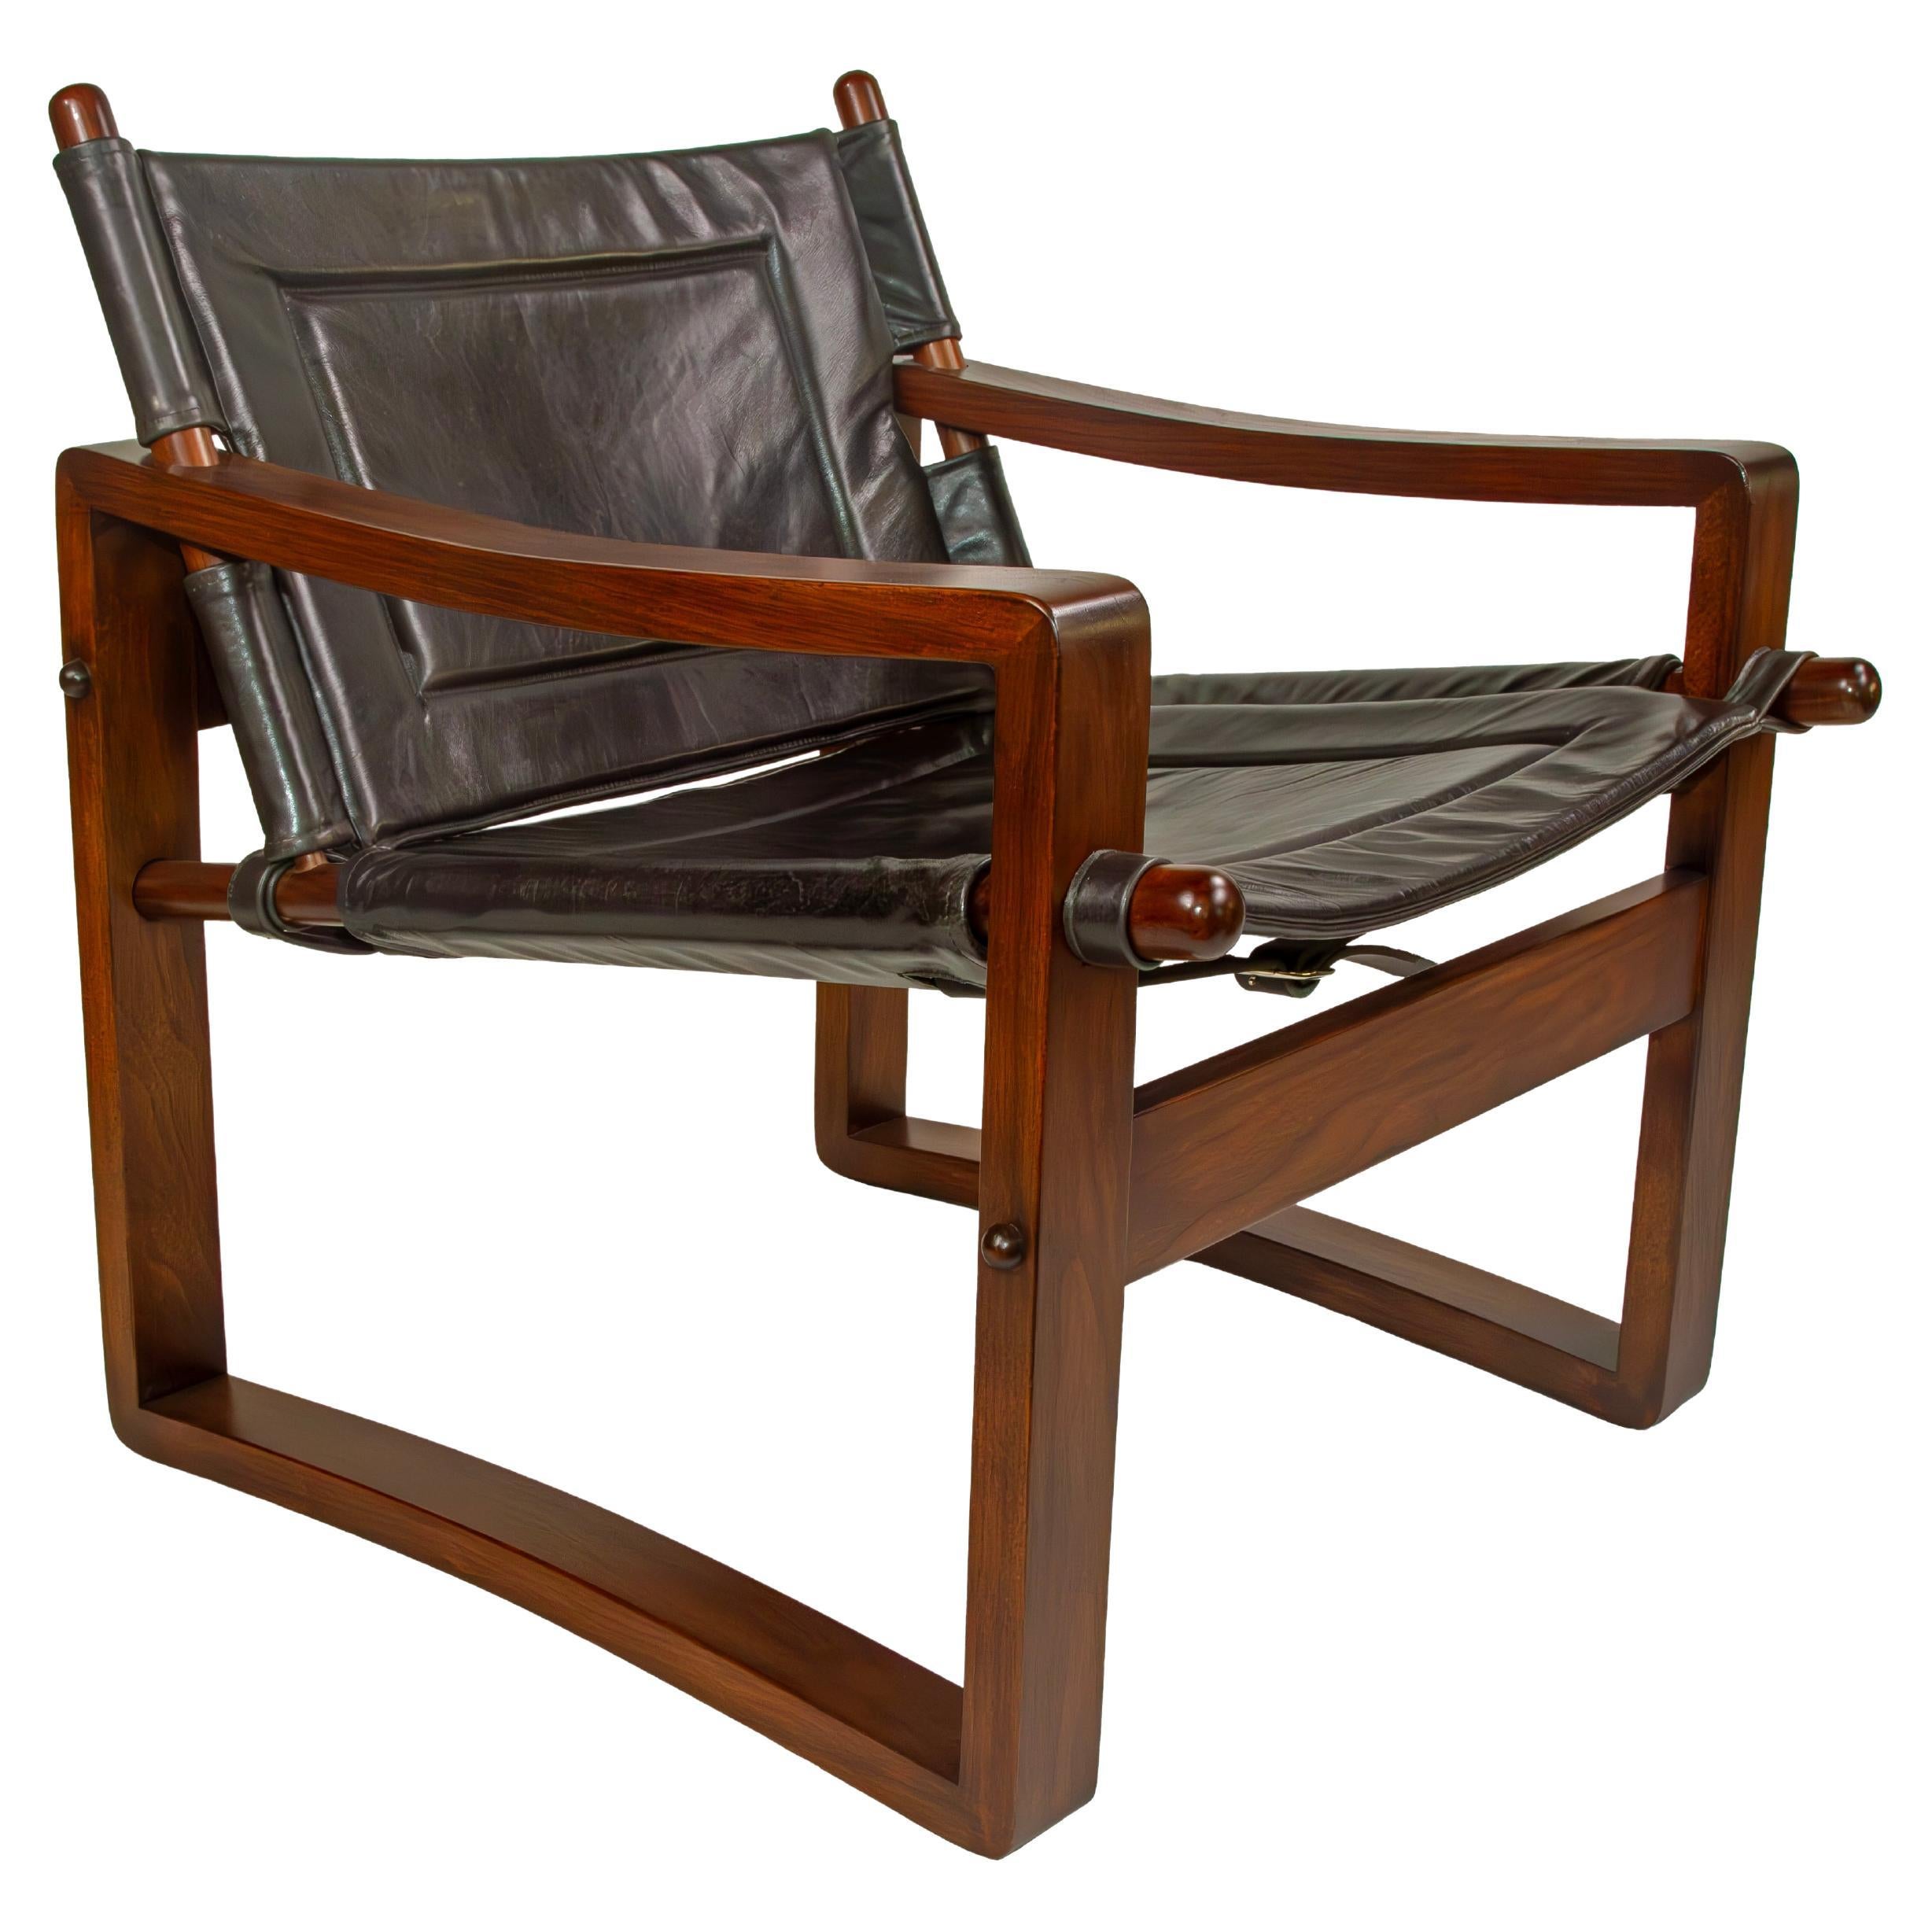 Walnut Campaign Safari Chair with Black or Brown Leather or Suede Upholstery